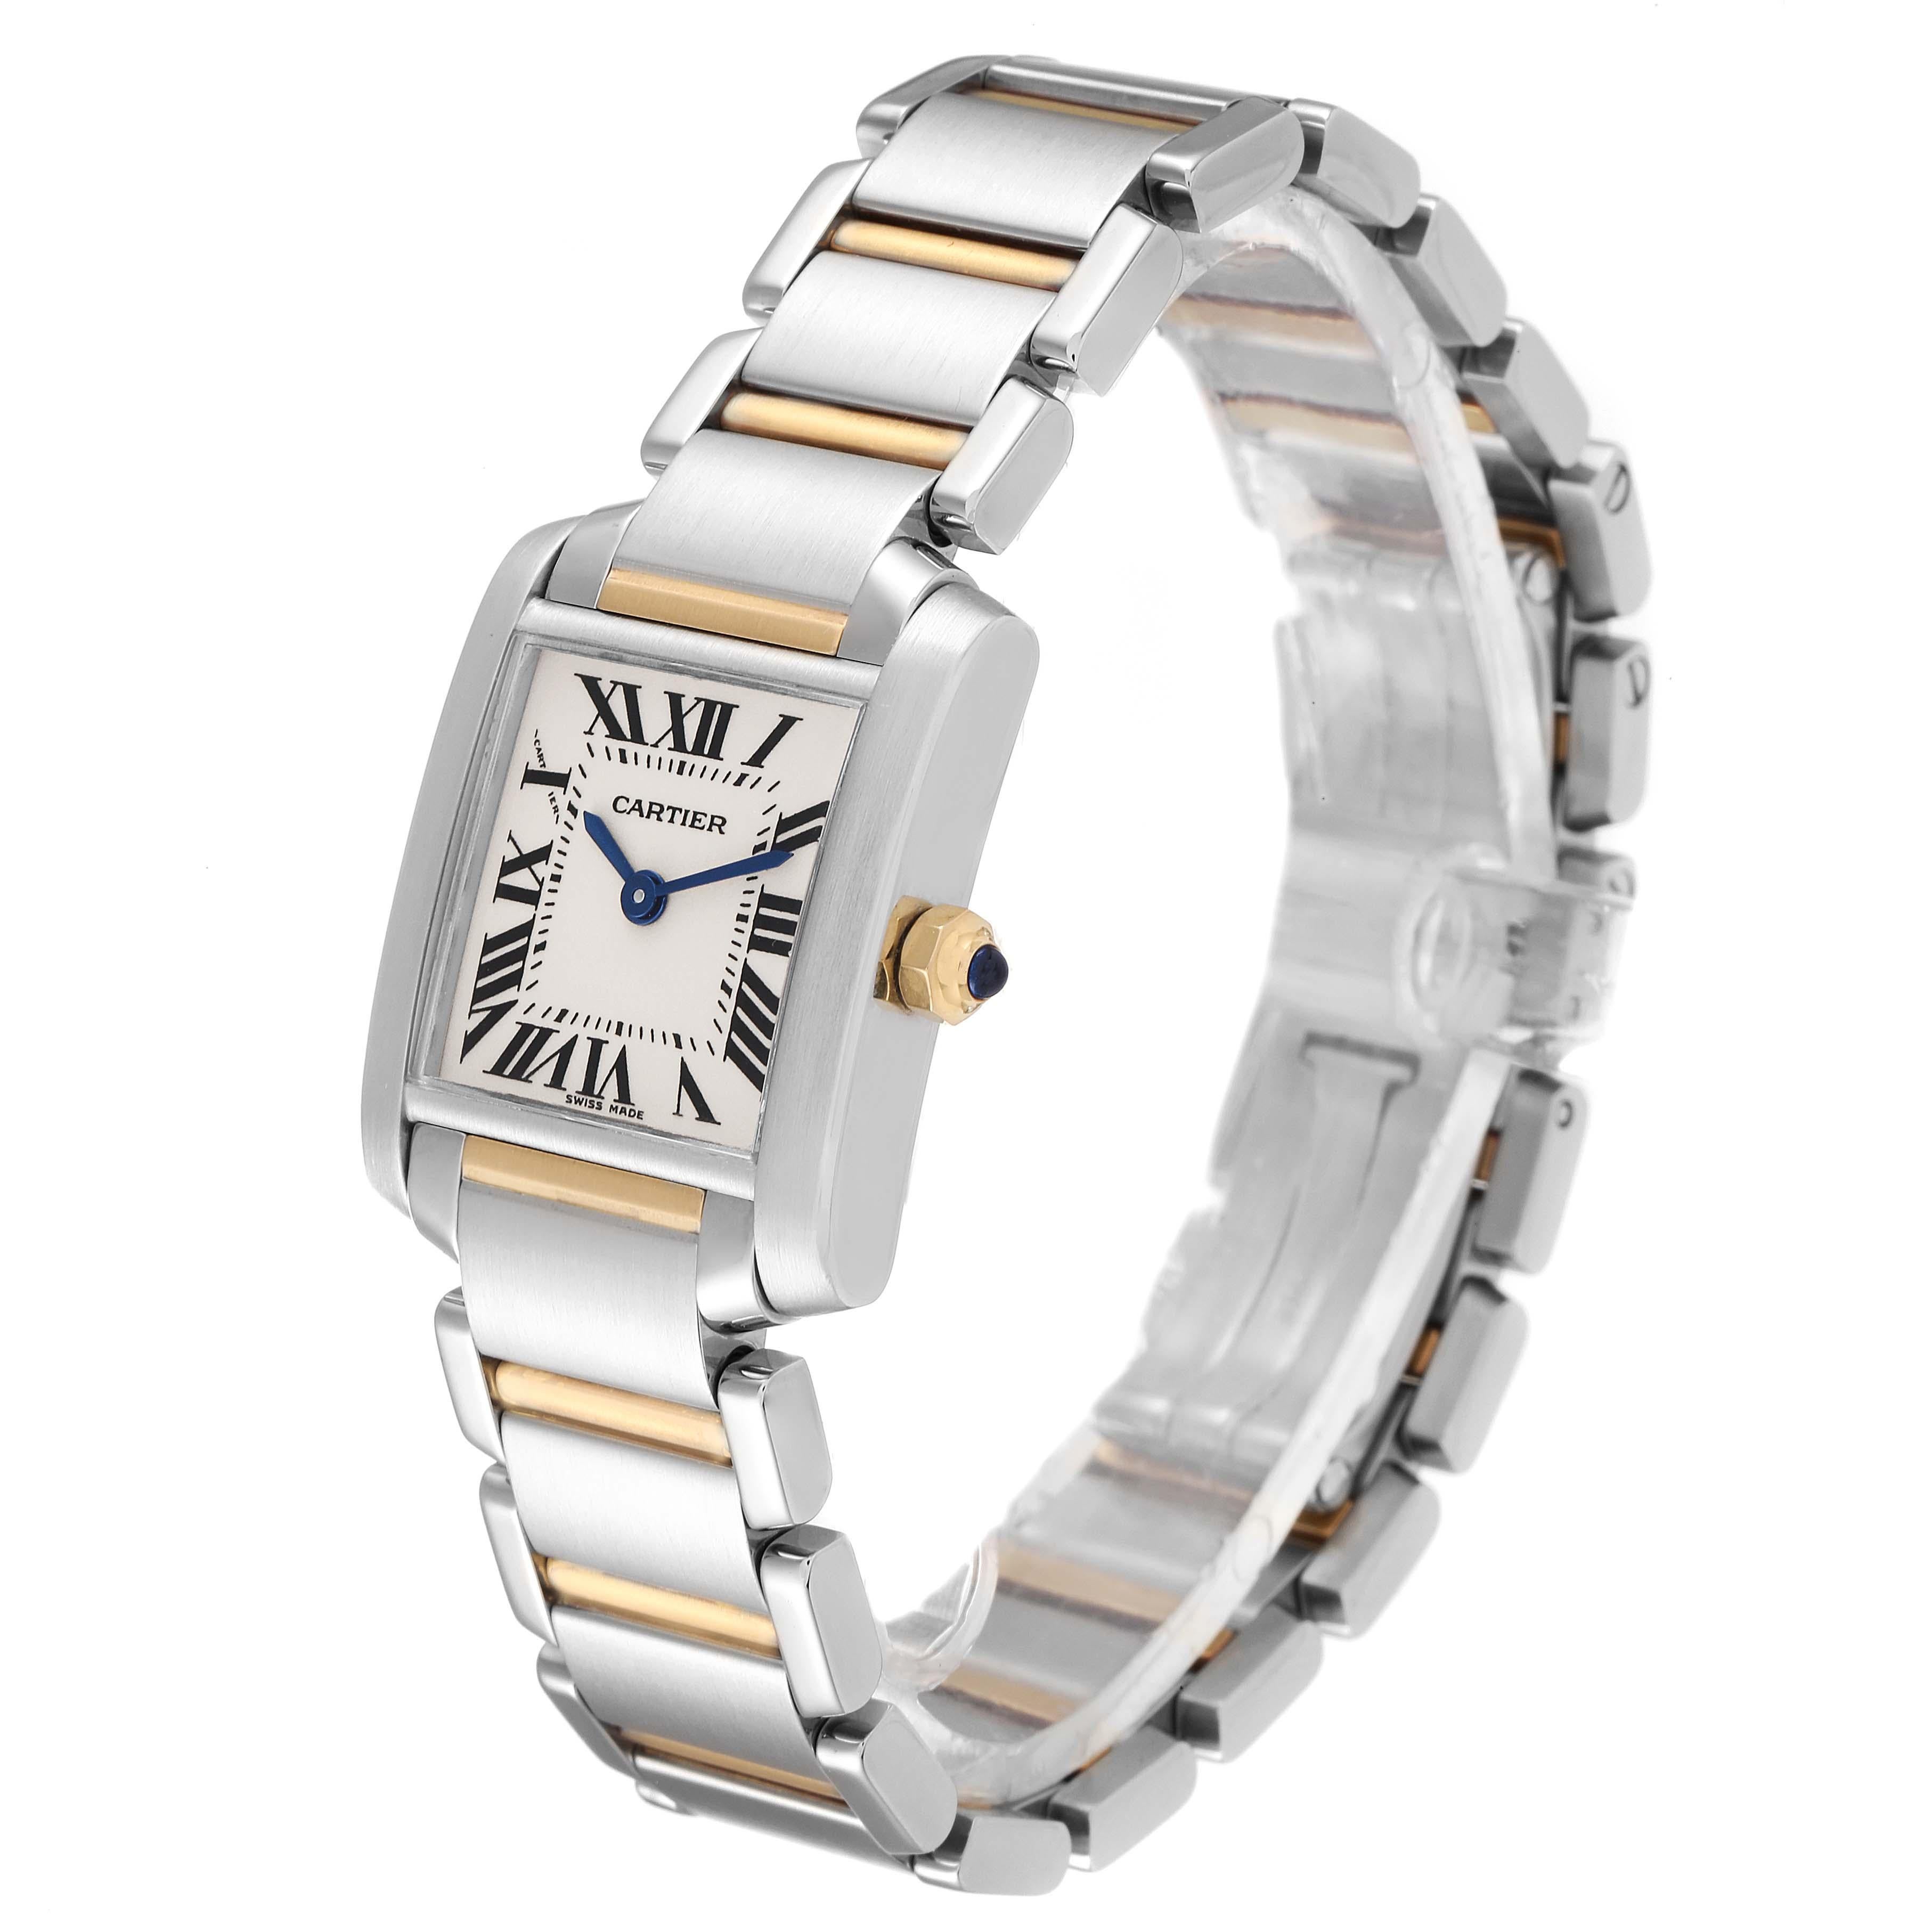 Cartier Tank Francaise Small Two Tone Ladies Watch W51007Q4 In Excellent Condition For Sale In Atlanta, GA